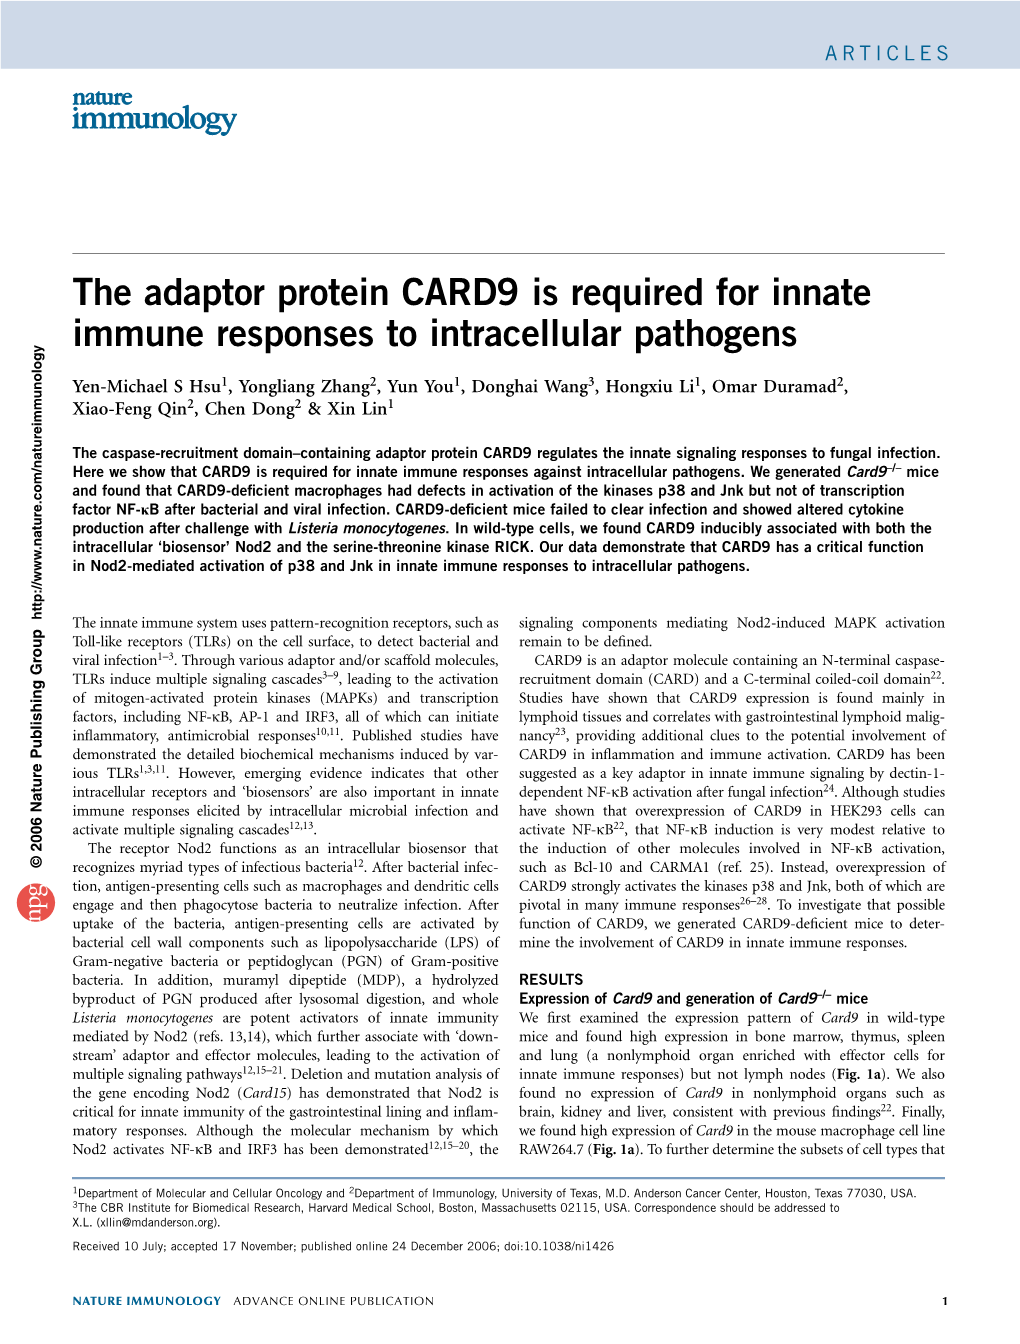 The Adaptor Protein CARD9 Is Required for Innate Immune Responses to Intracellular Pathogens